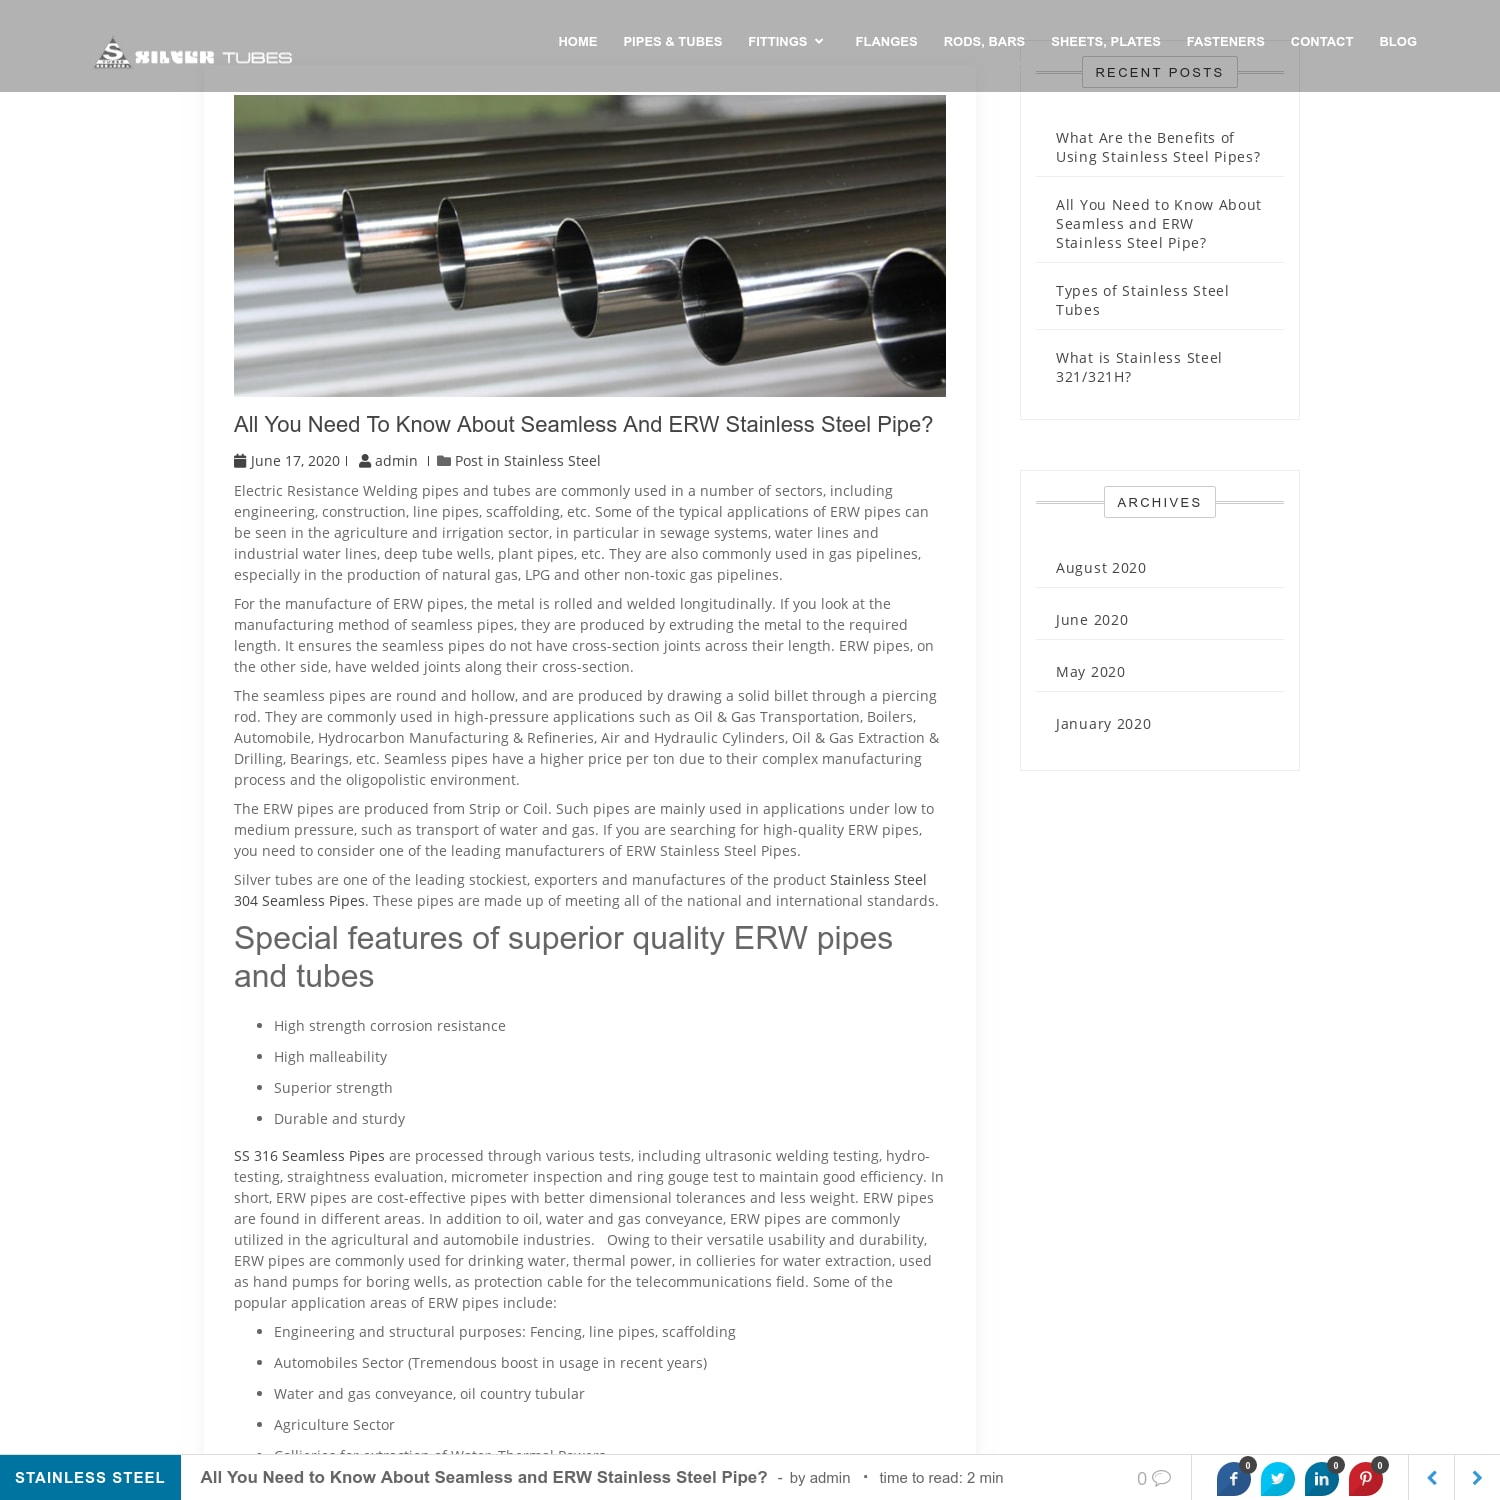 All You Need to Know About Seamless and ERW Stainless Steel Pipe?